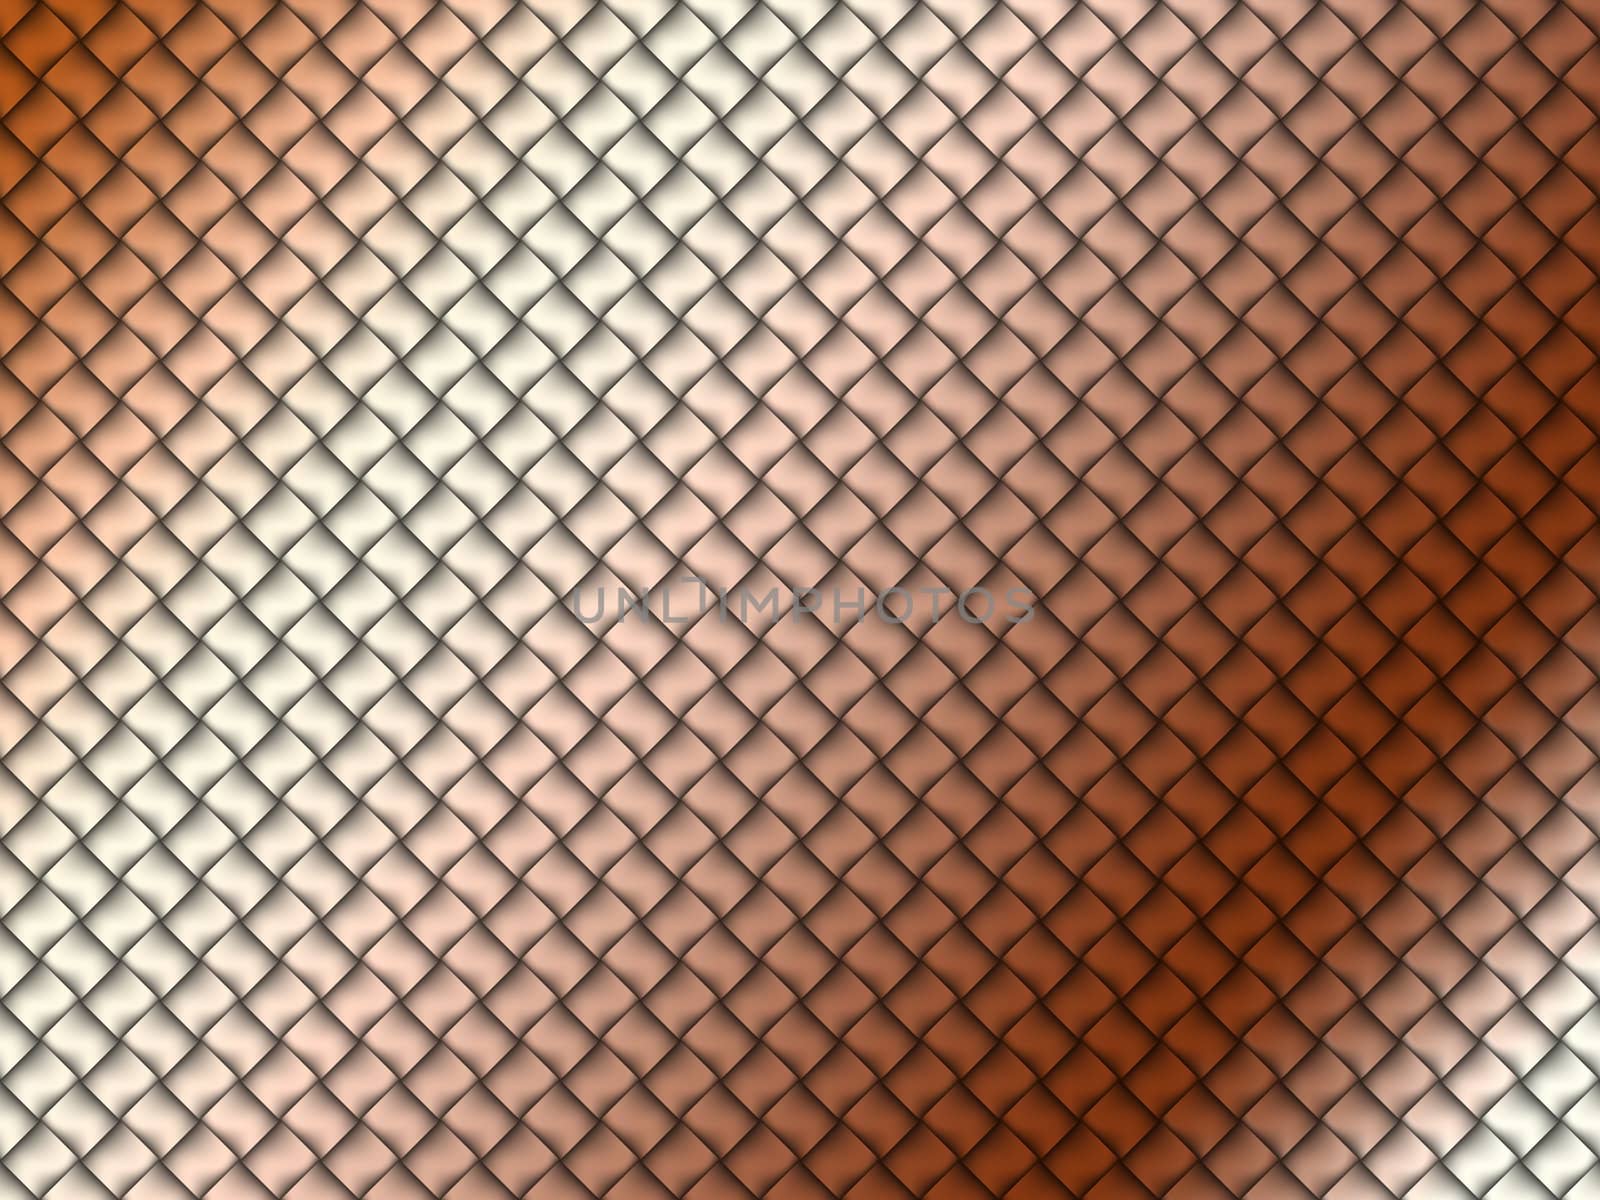 A woven pattern making a background with many uses,suitable for web or print.